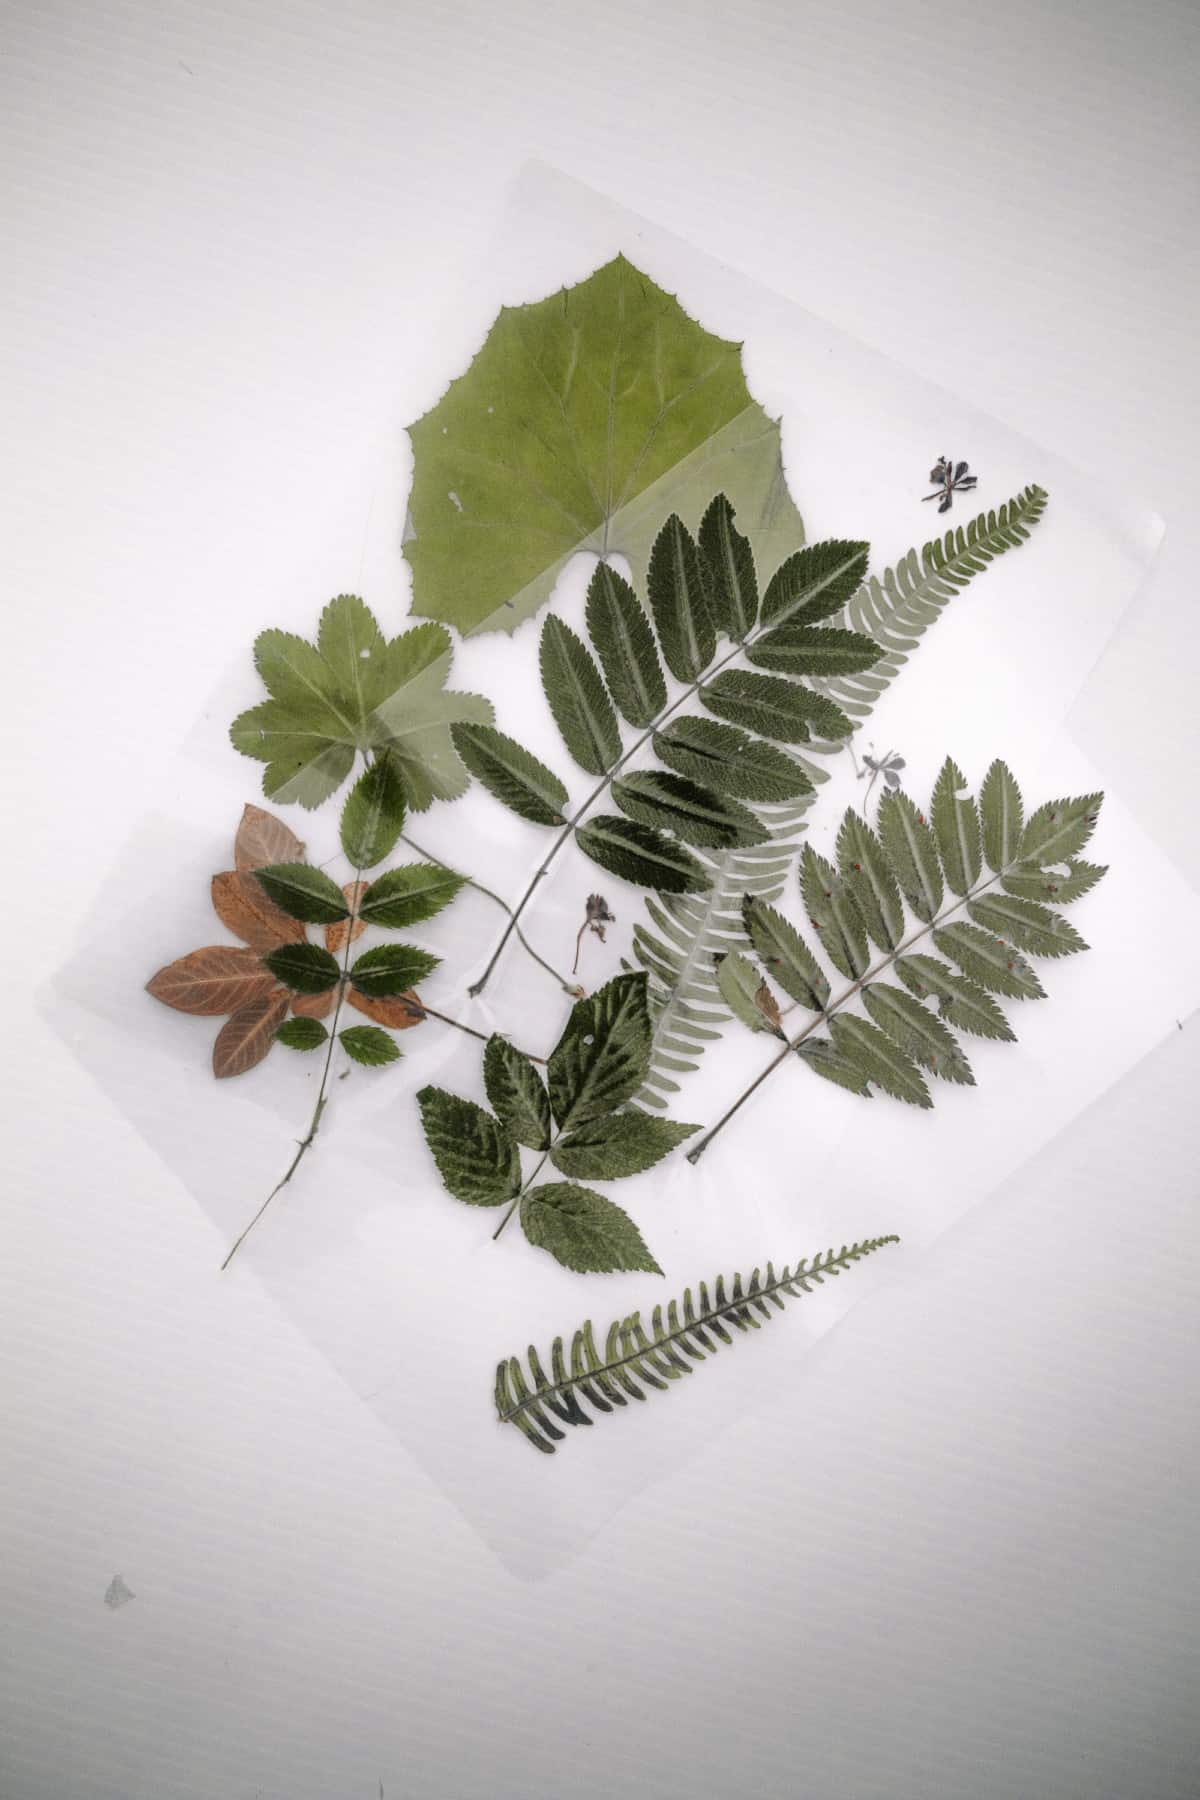 Capture the greenery of your favorite location with this simple DIY leaf bookmark tutorial. A great way bring some outside greenery into your home.